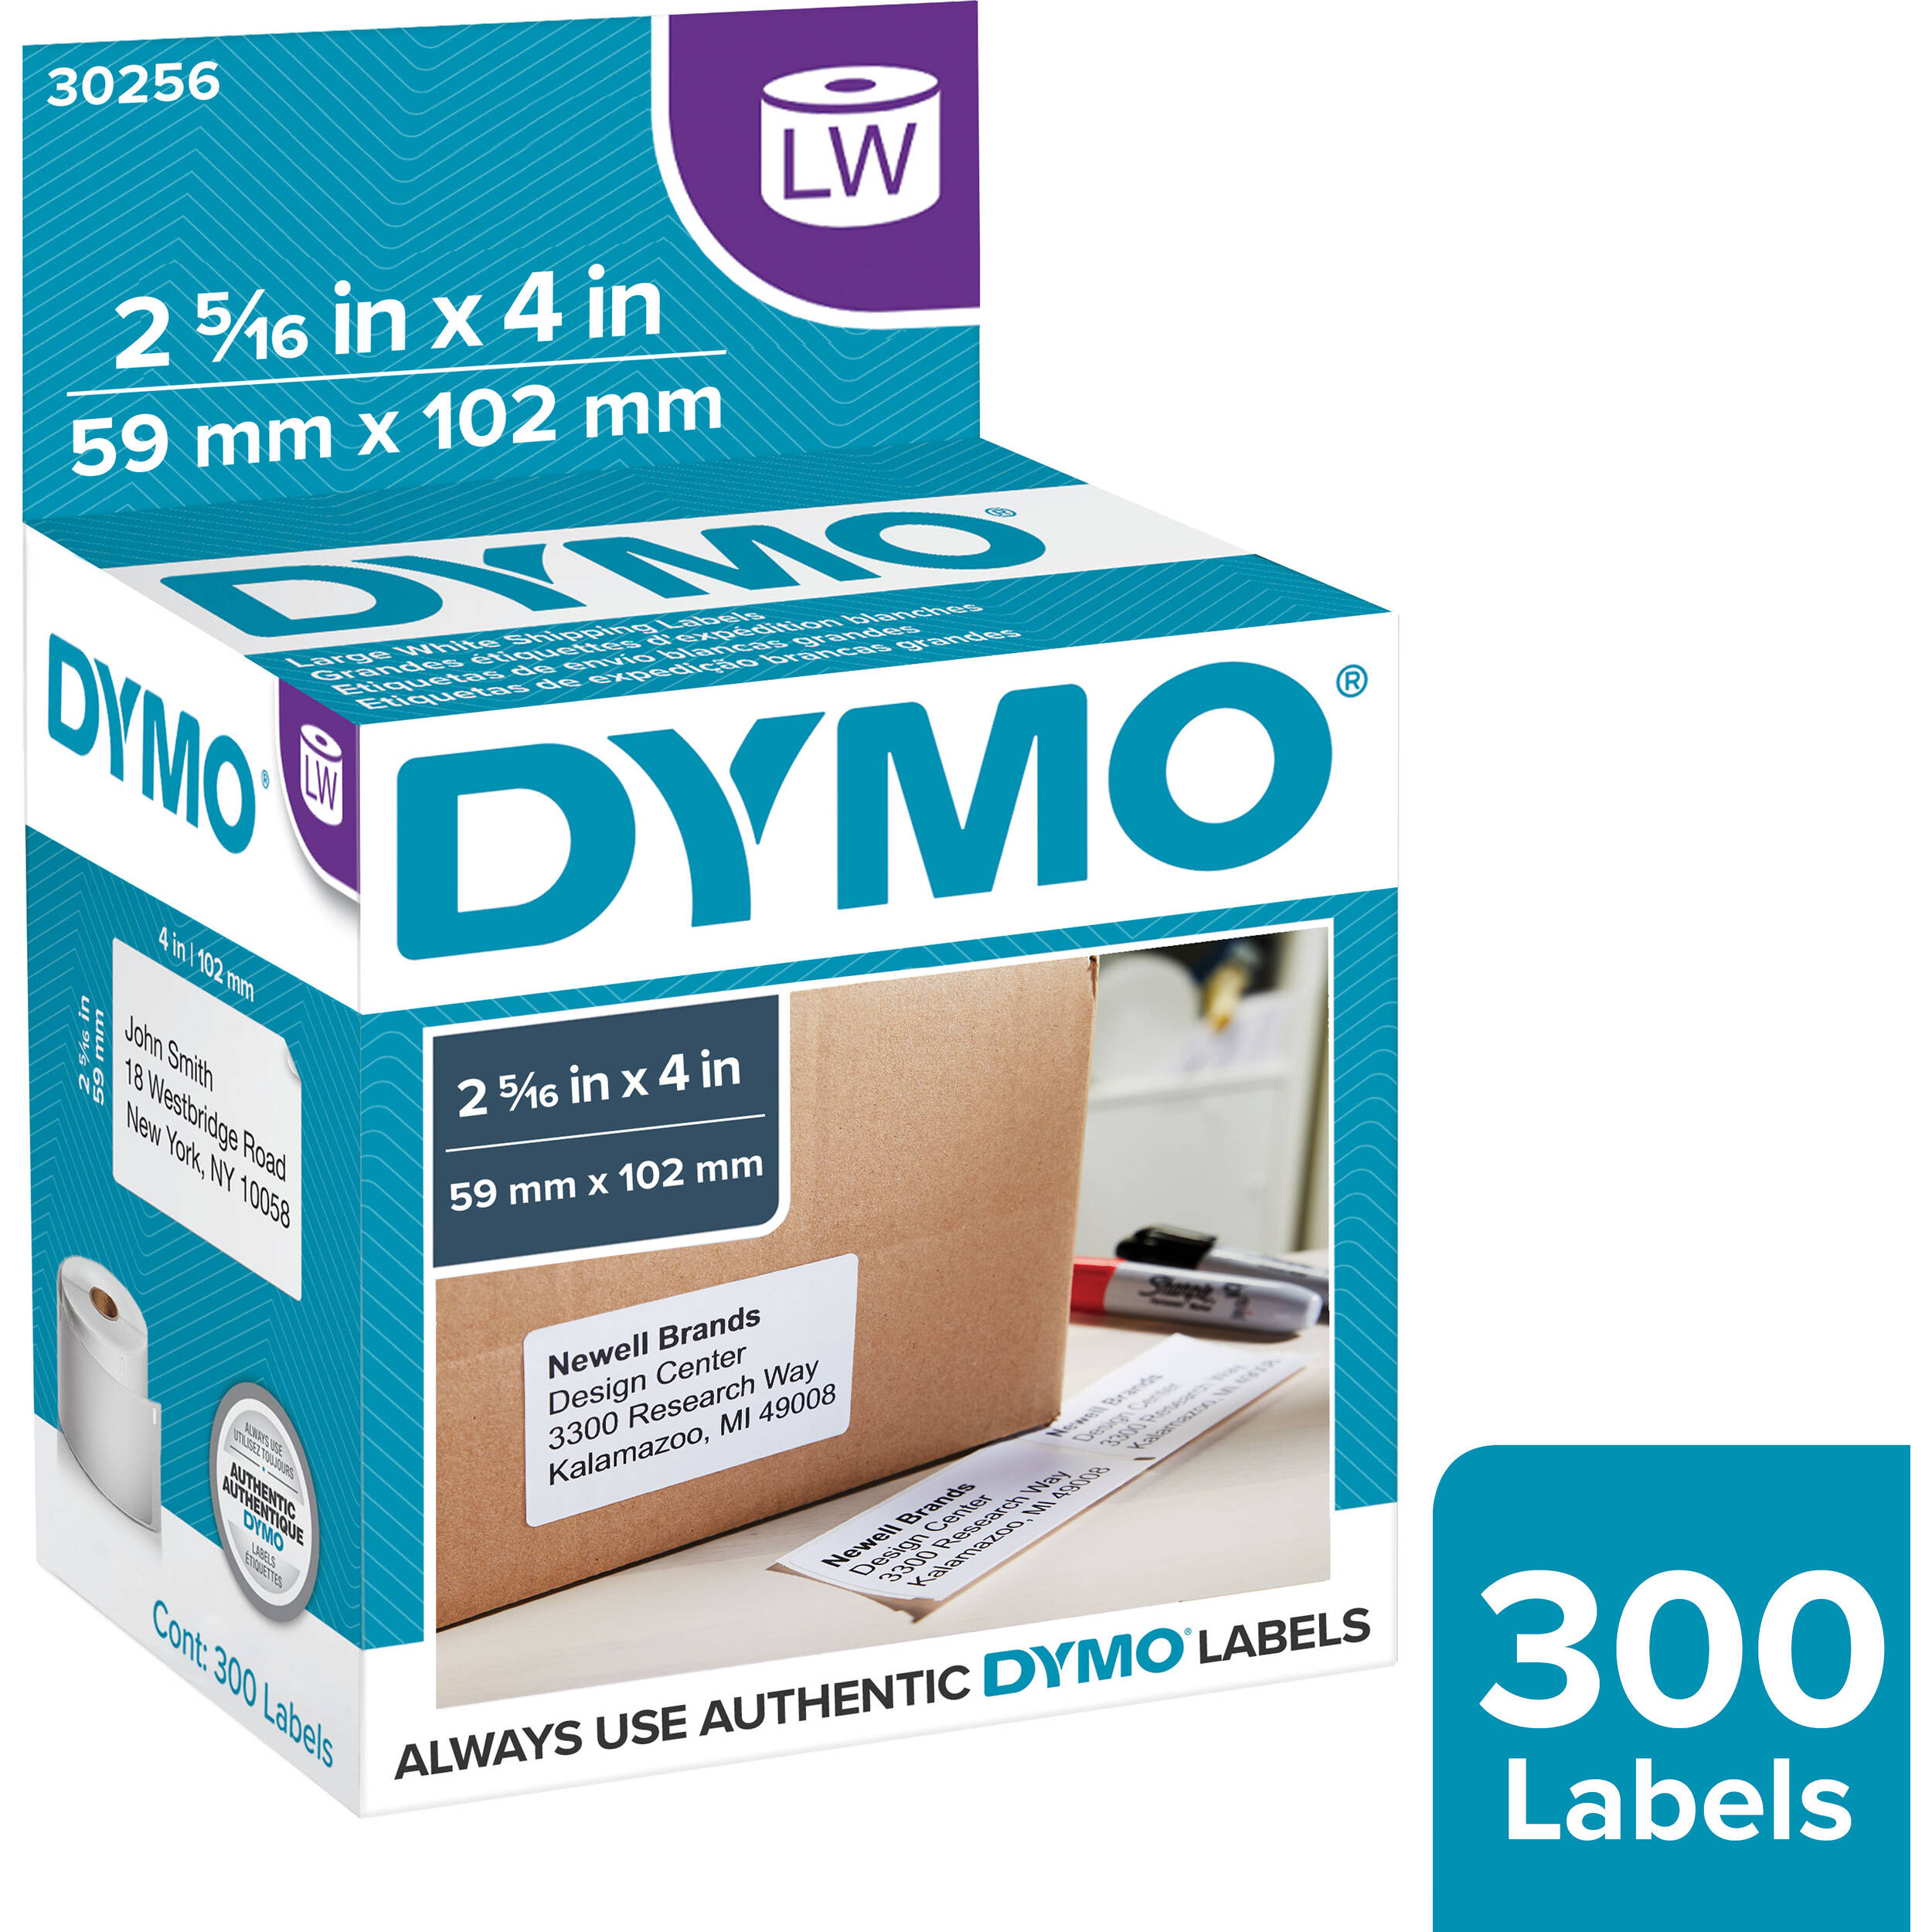 dymo 30277 label template